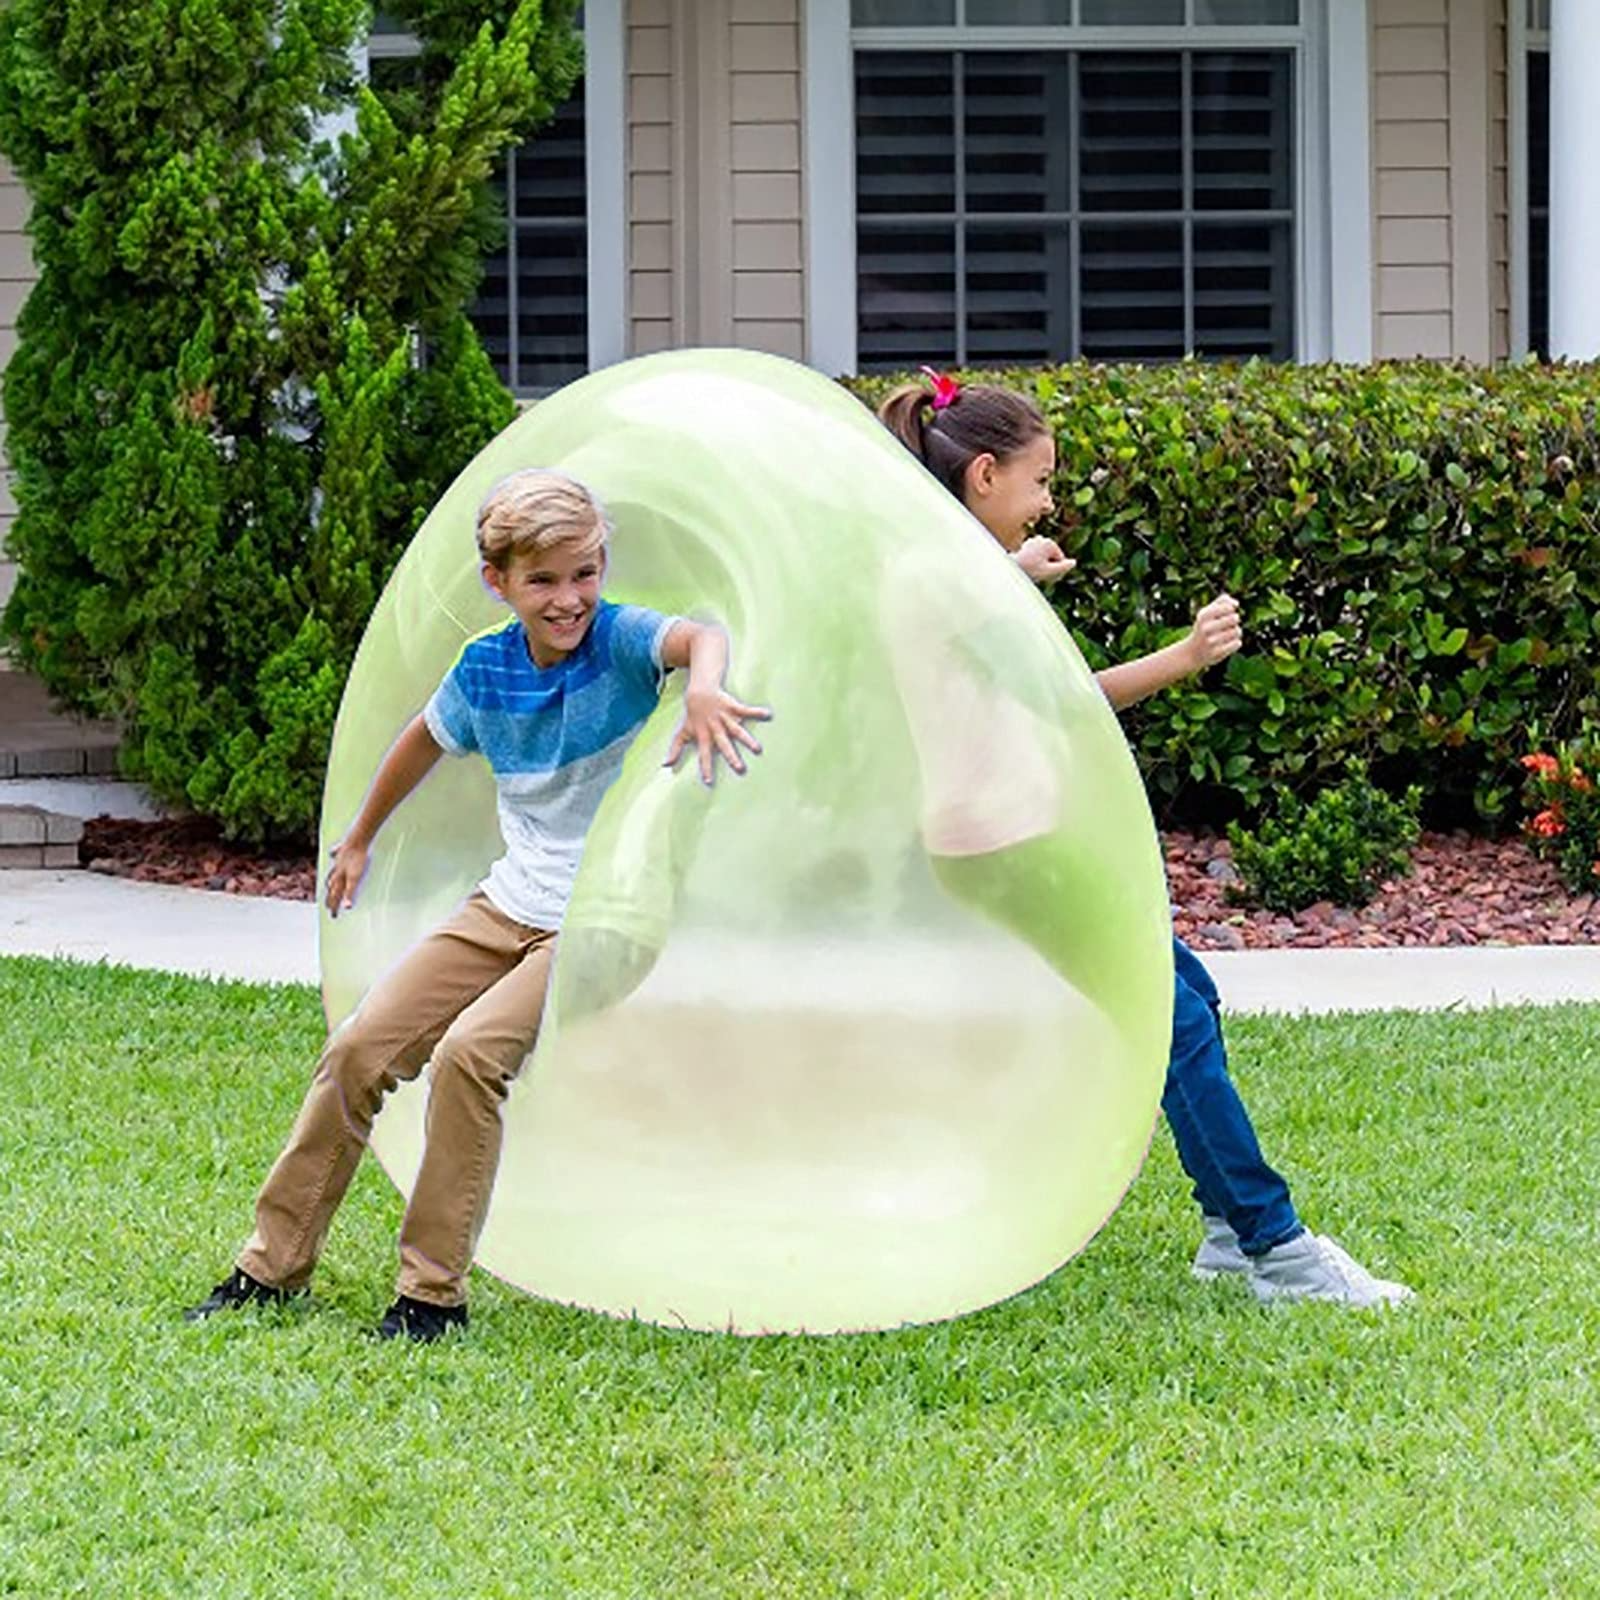 1PCS Sports & Outdoors Super Size Bubble Ball Toy for Adults Kids Inflatable Water Ball Beach Garden Ball Soft Rubber Ball Outdoor Party